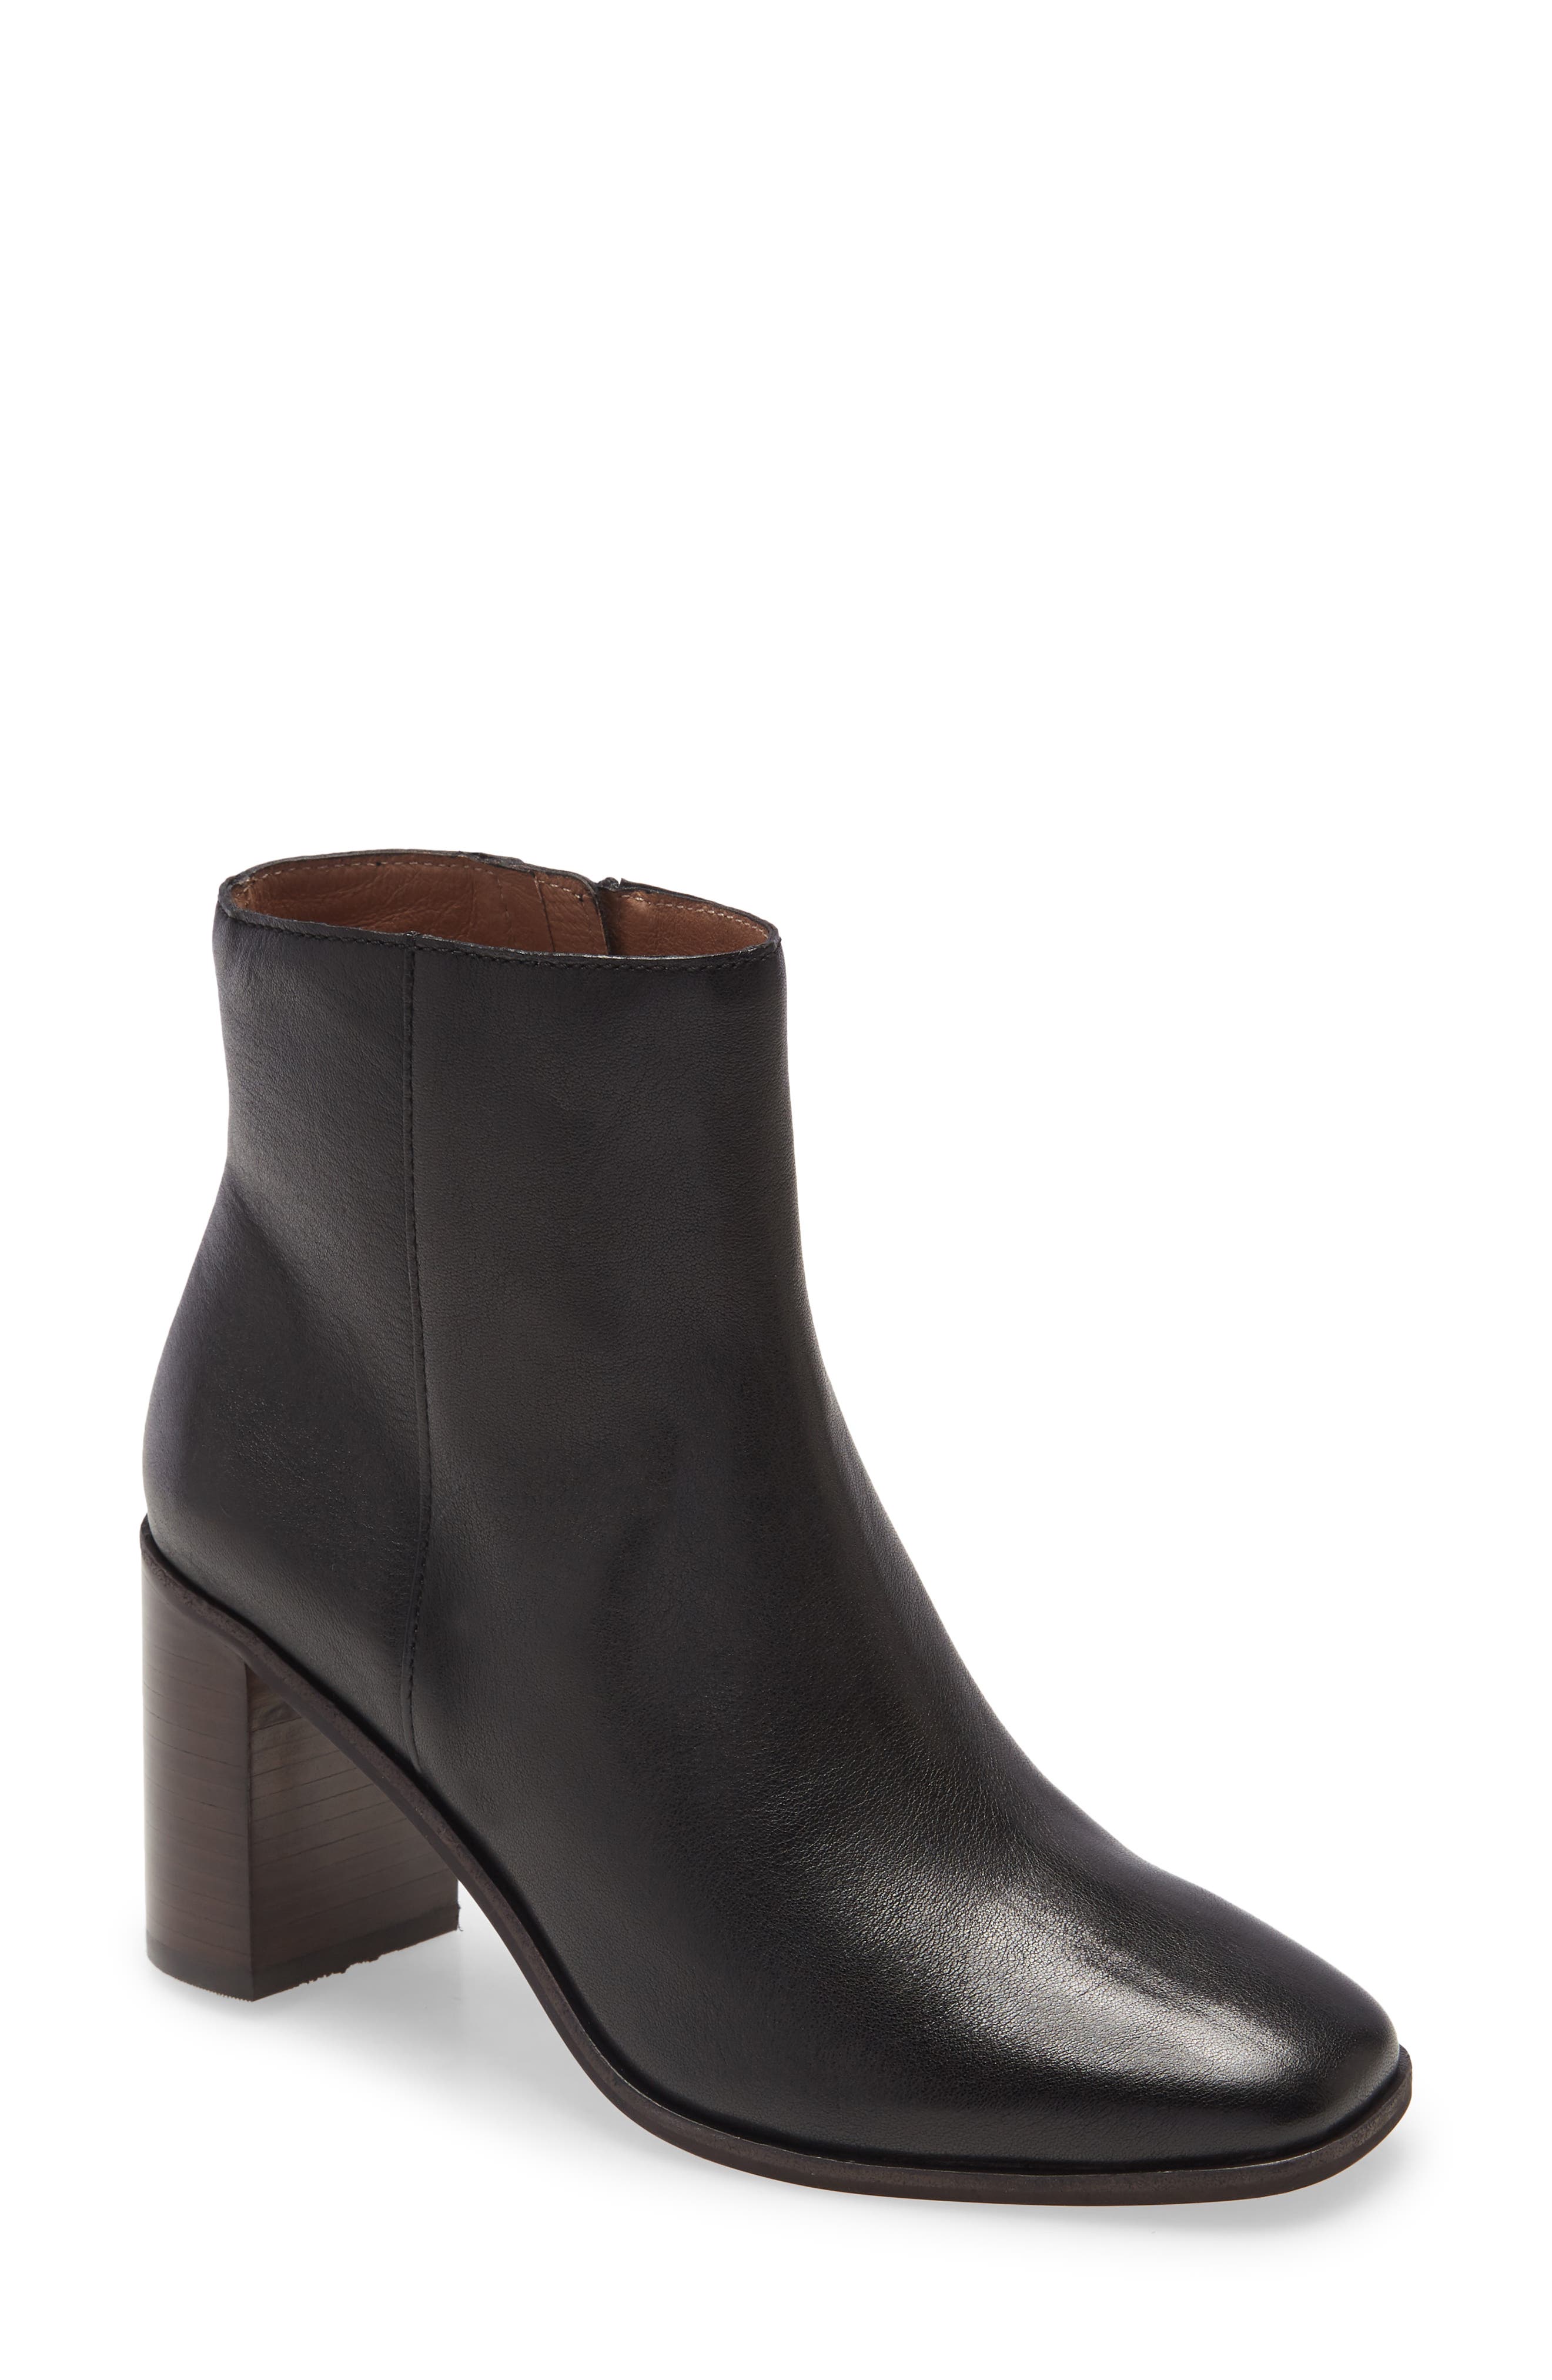 Madewell Booties \u0026 Ankle Boots | Nordstrom